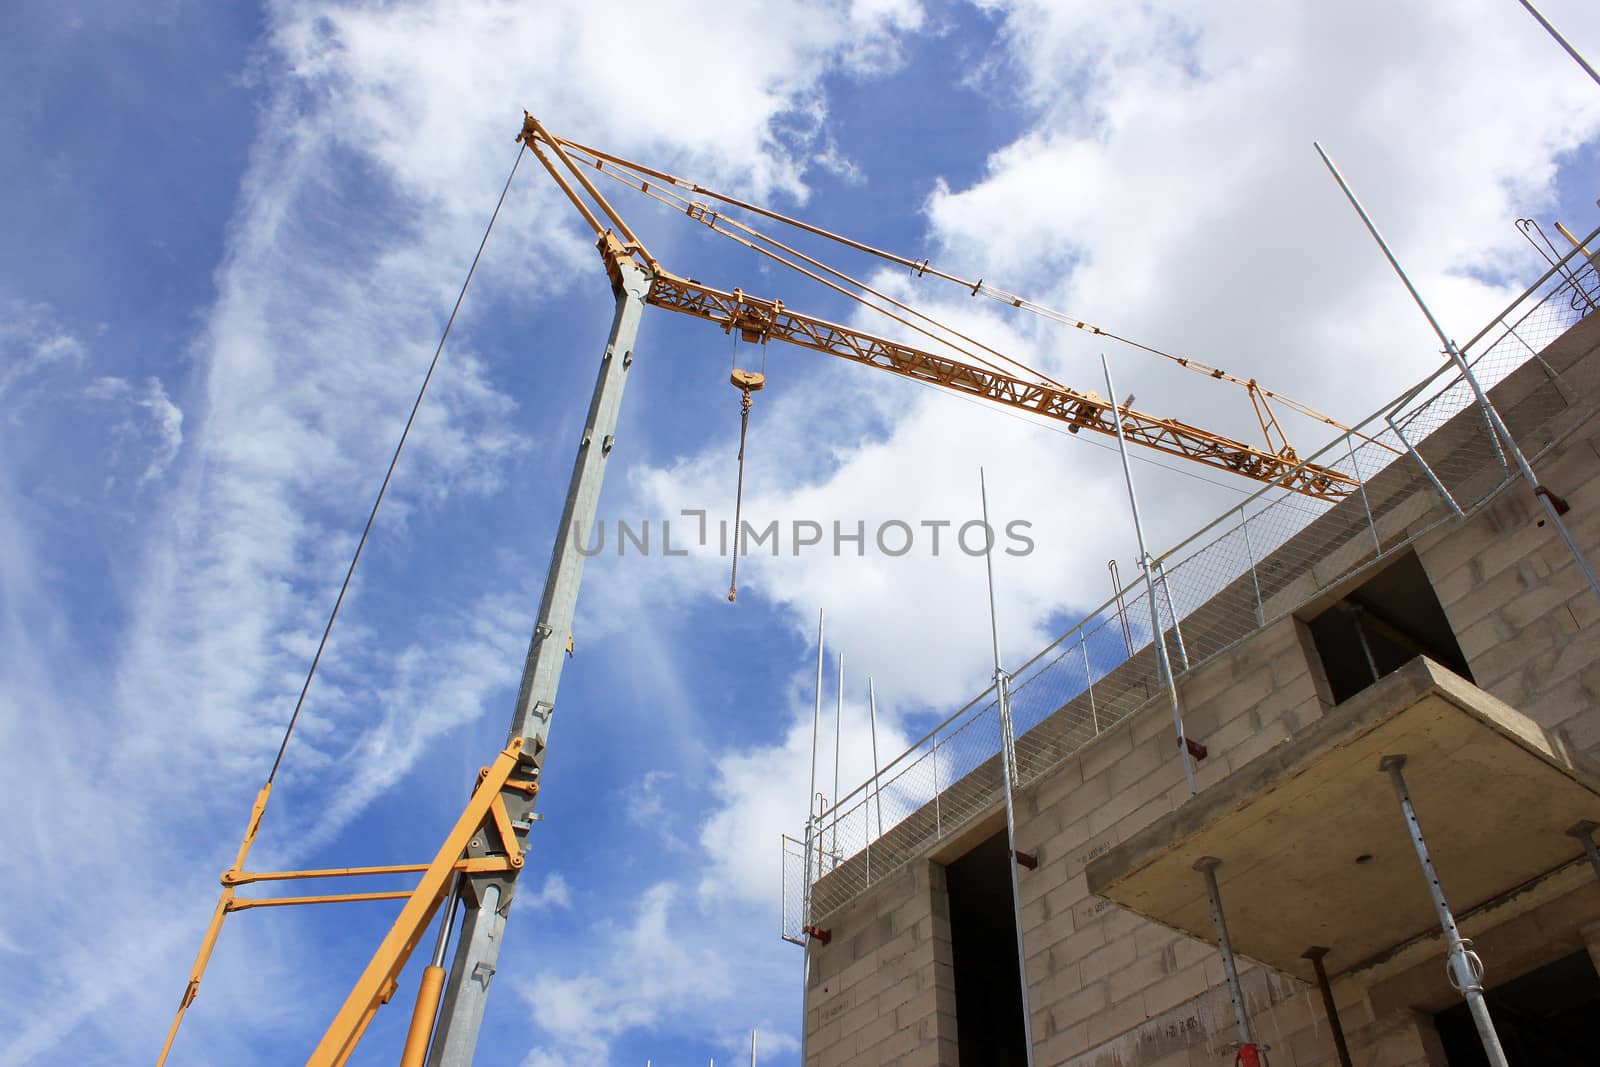 a crane at a construction site for the construction of residential housing